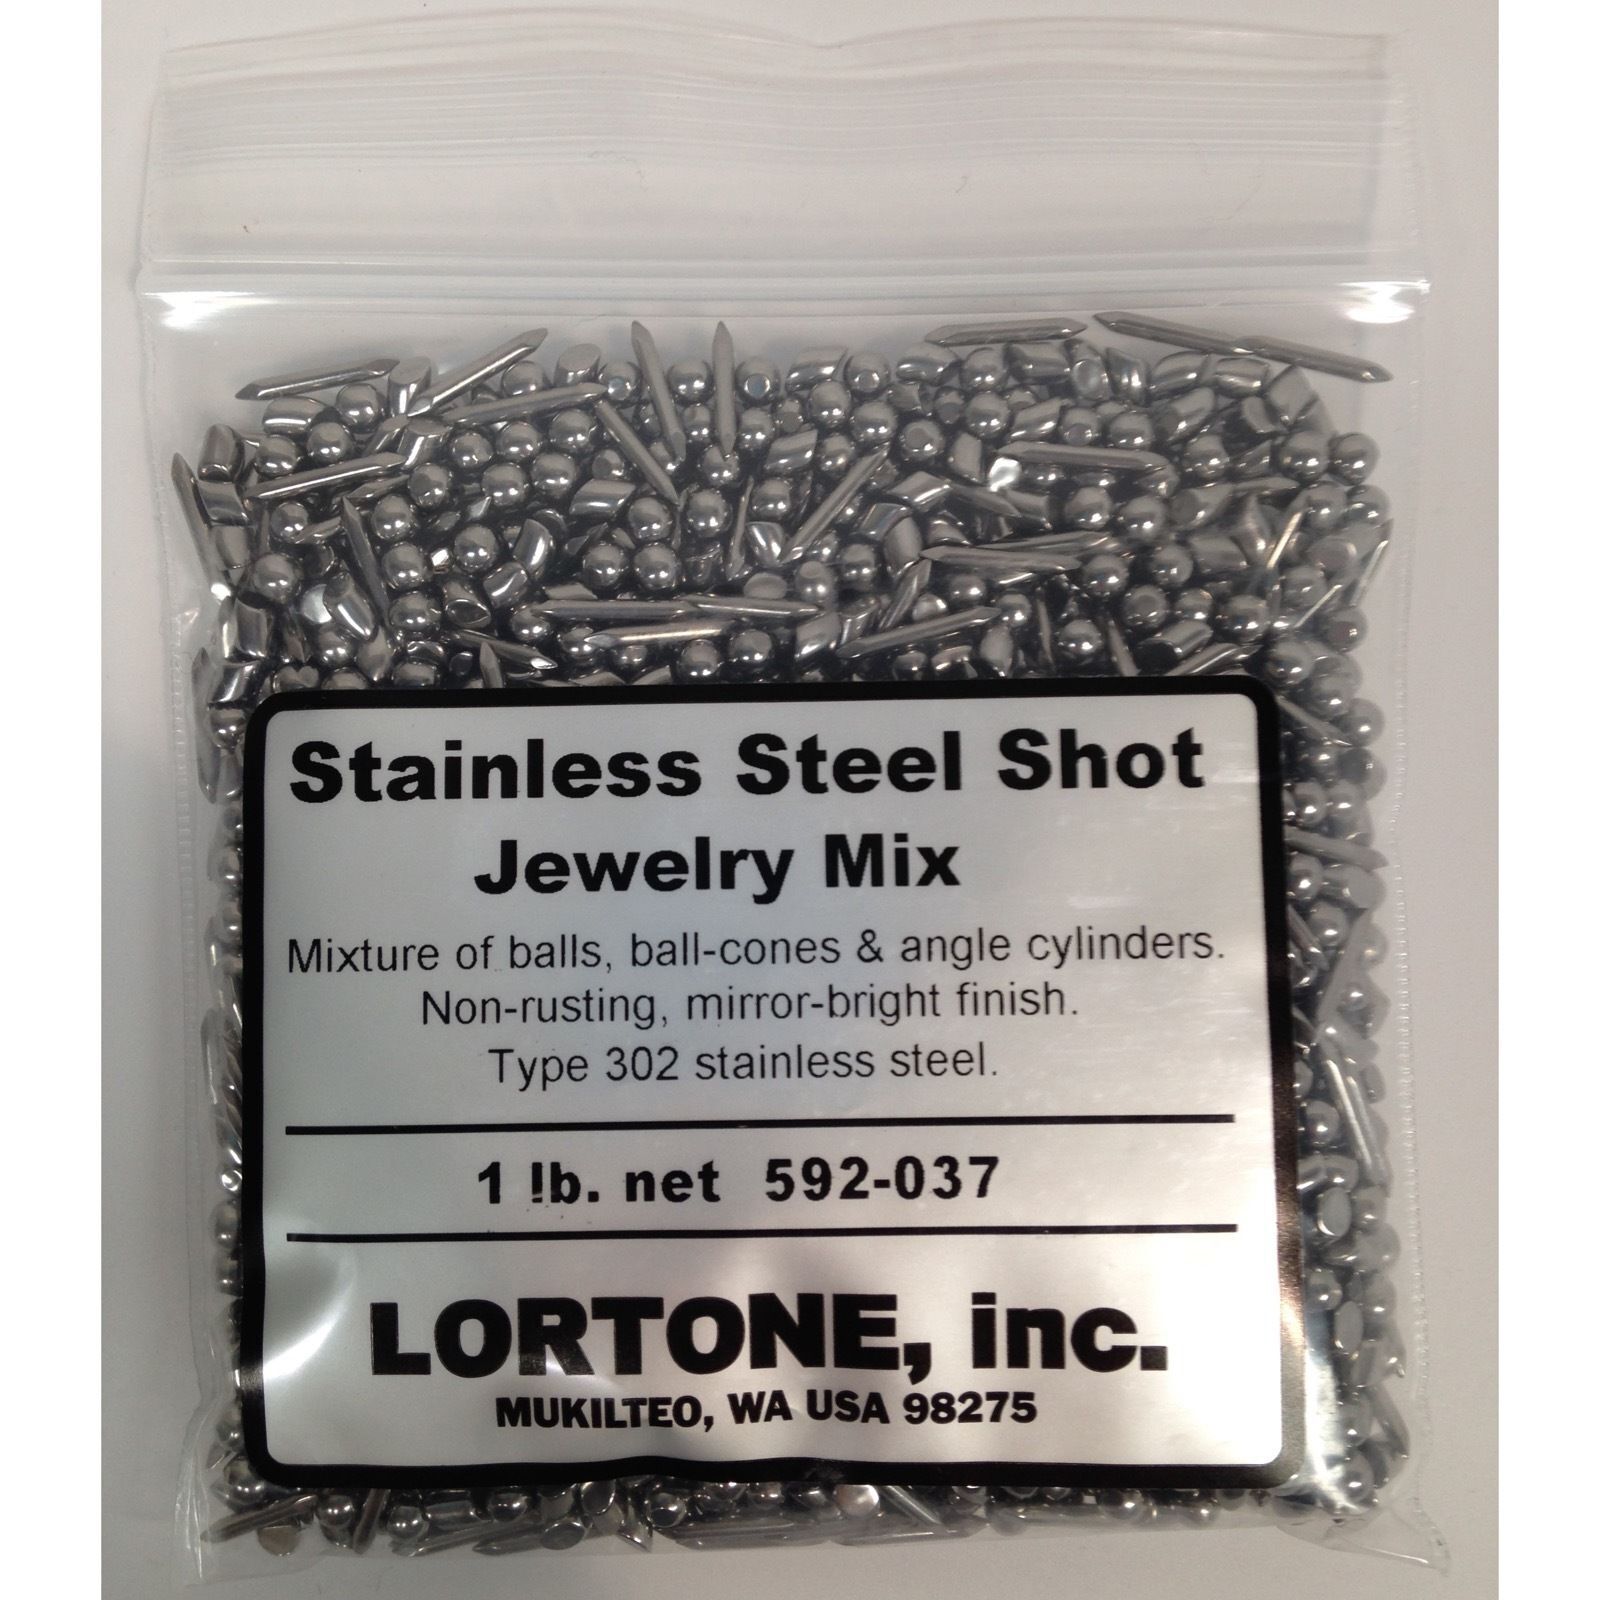 Lortone Stainless Steel Shot Mix 1 lb for Tumbling Jewelry Various Shapes